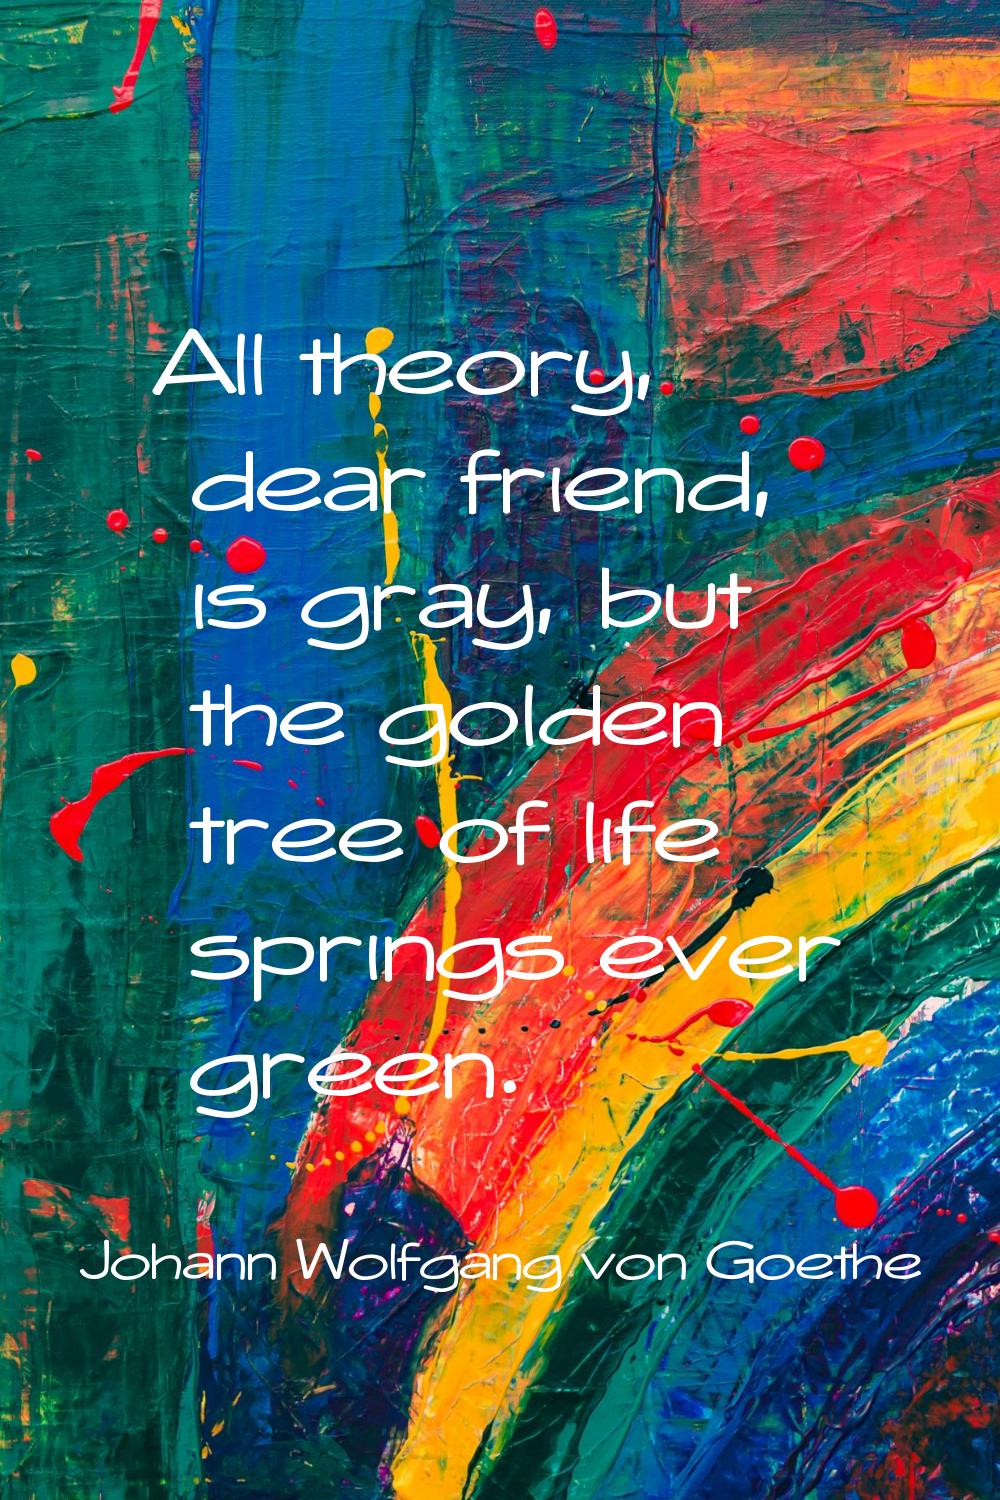 All theory, dear friend, is gray, but the golden tree of life springs ever green.